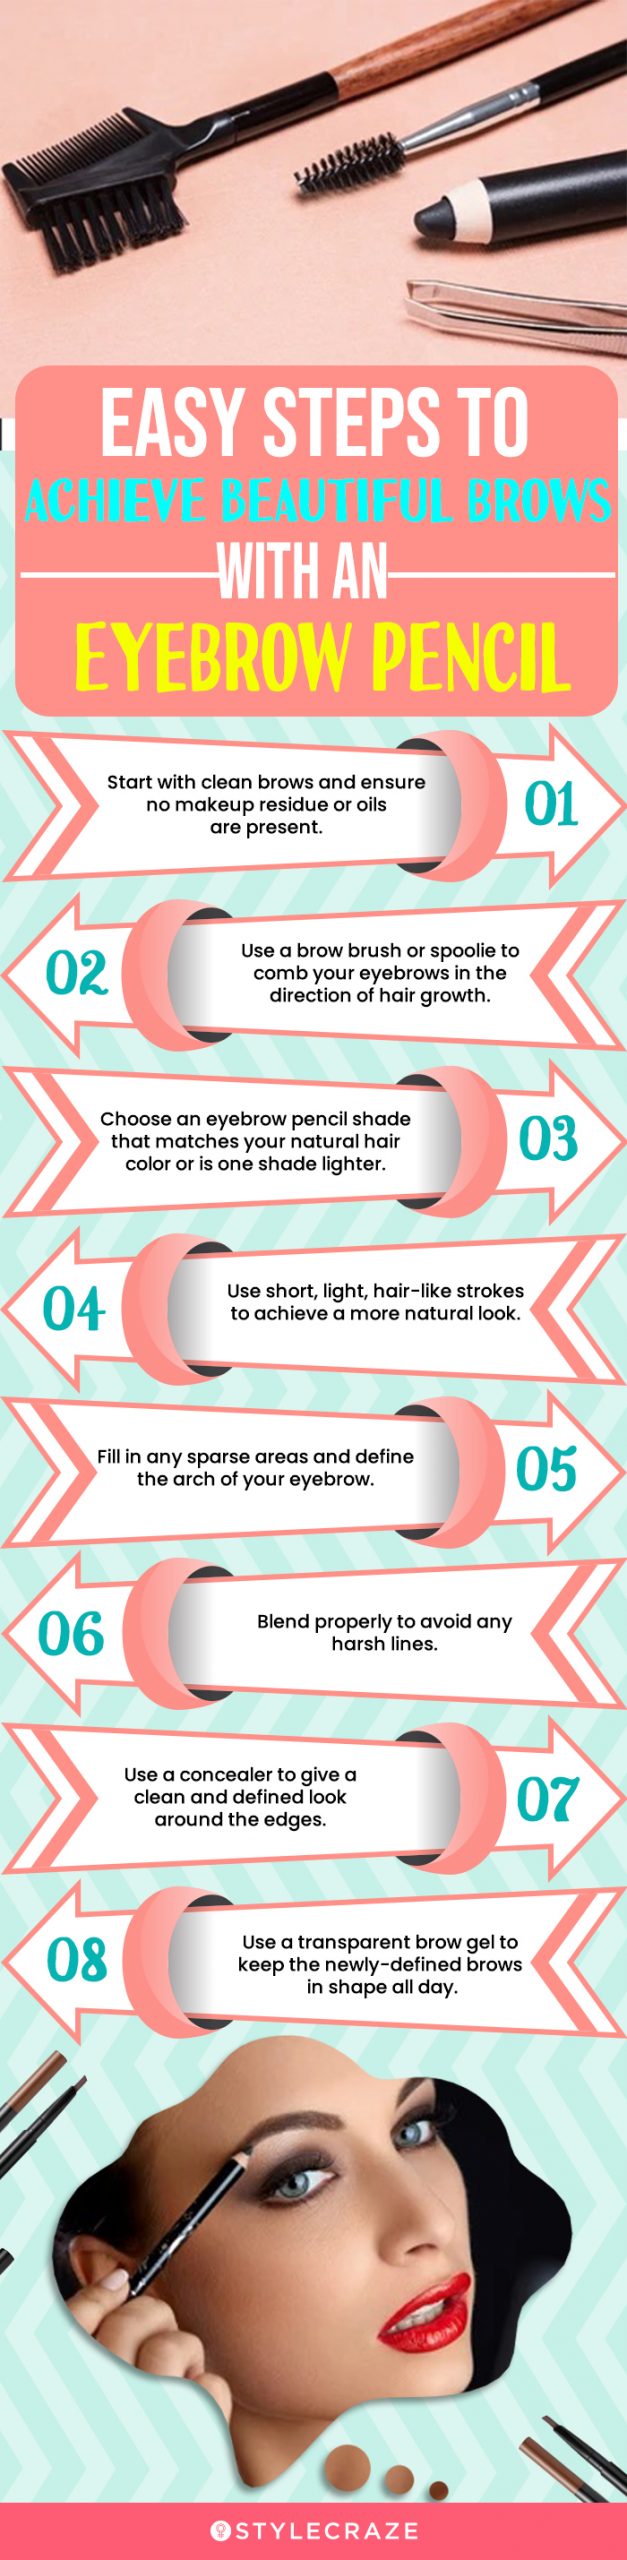 Easy Steps To Achieve Beautiful Brows With An Eyebrow Pencil (infographic)